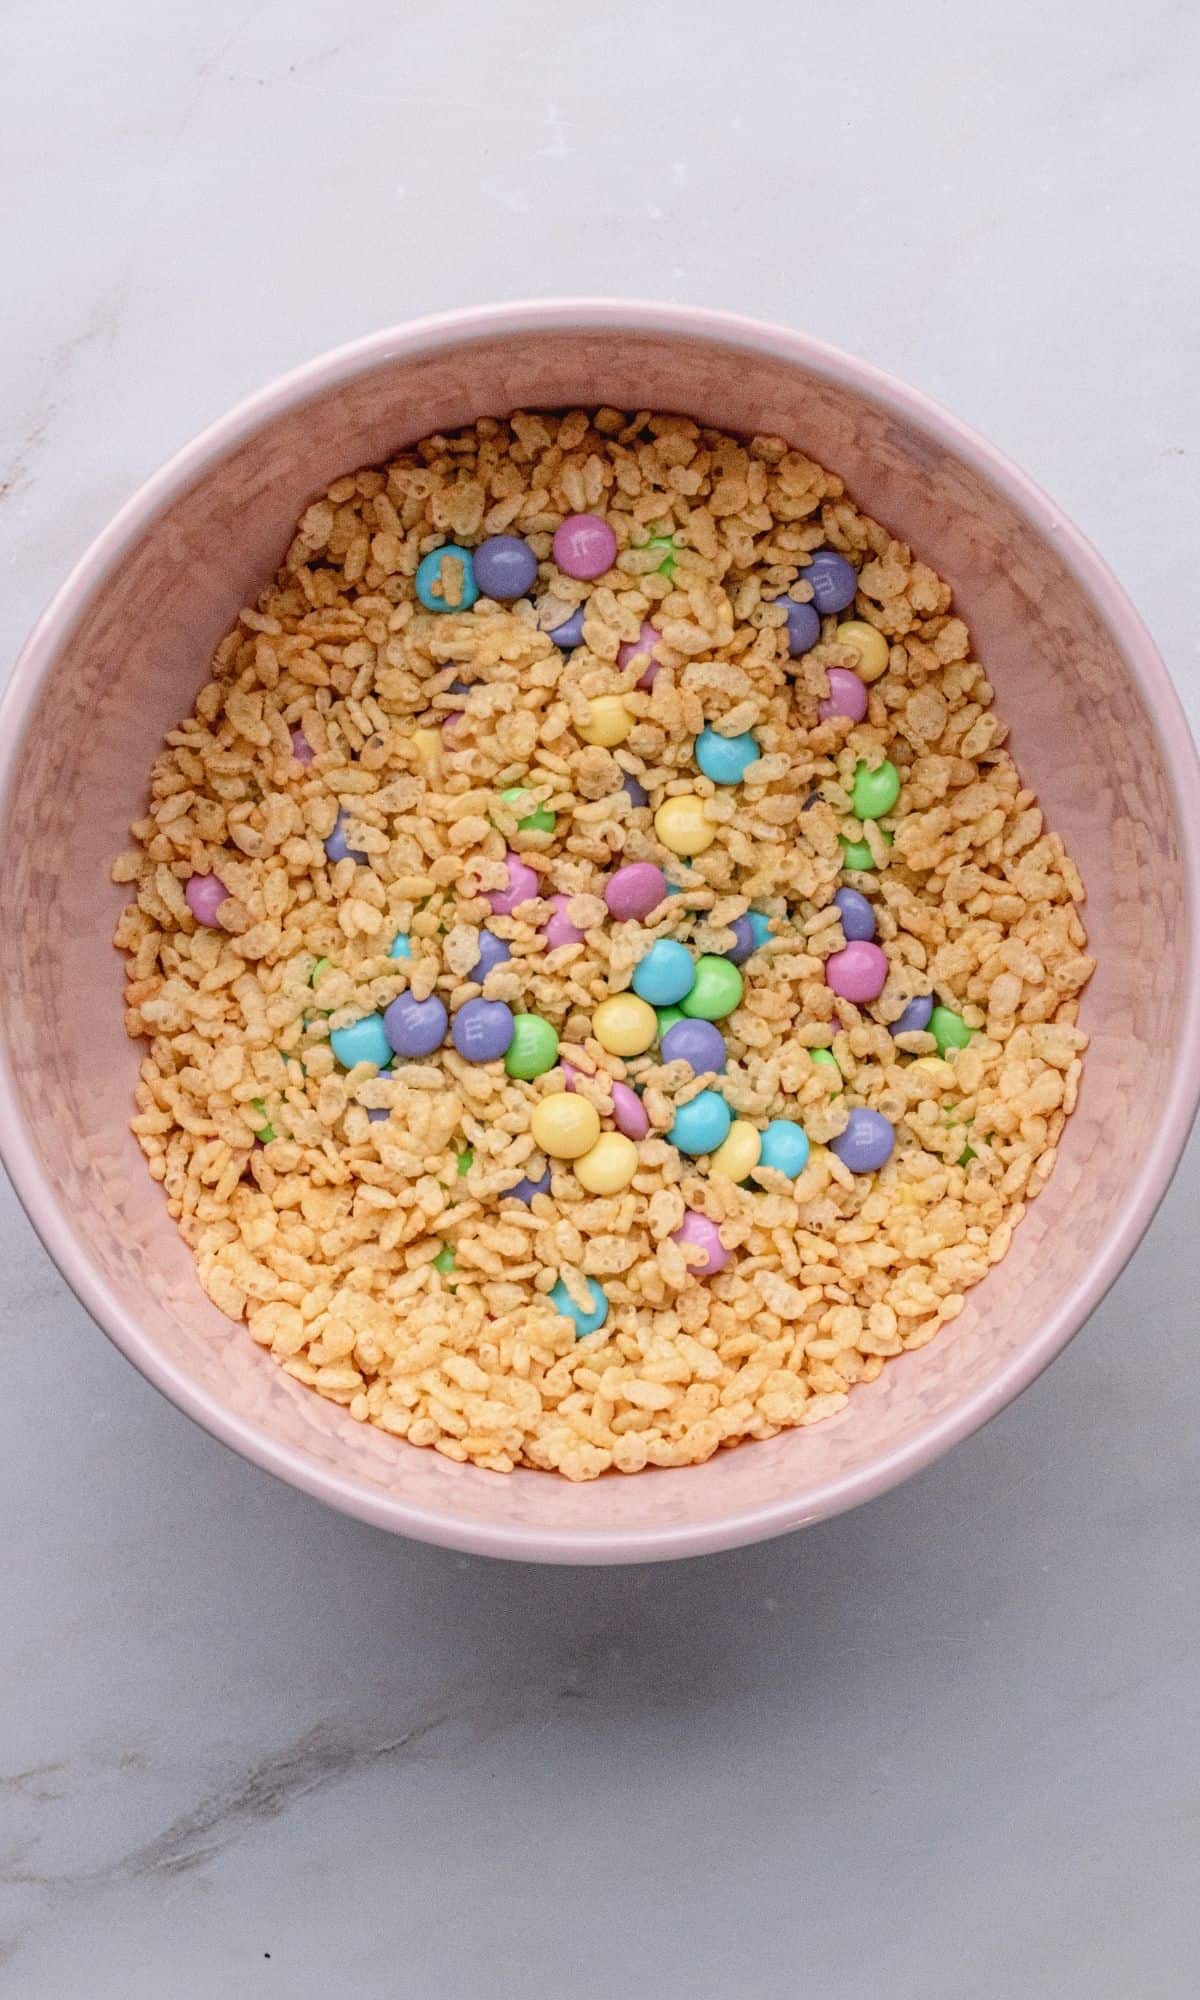 Overhead shot of rice krispies and M&Ms in a pink bowl.